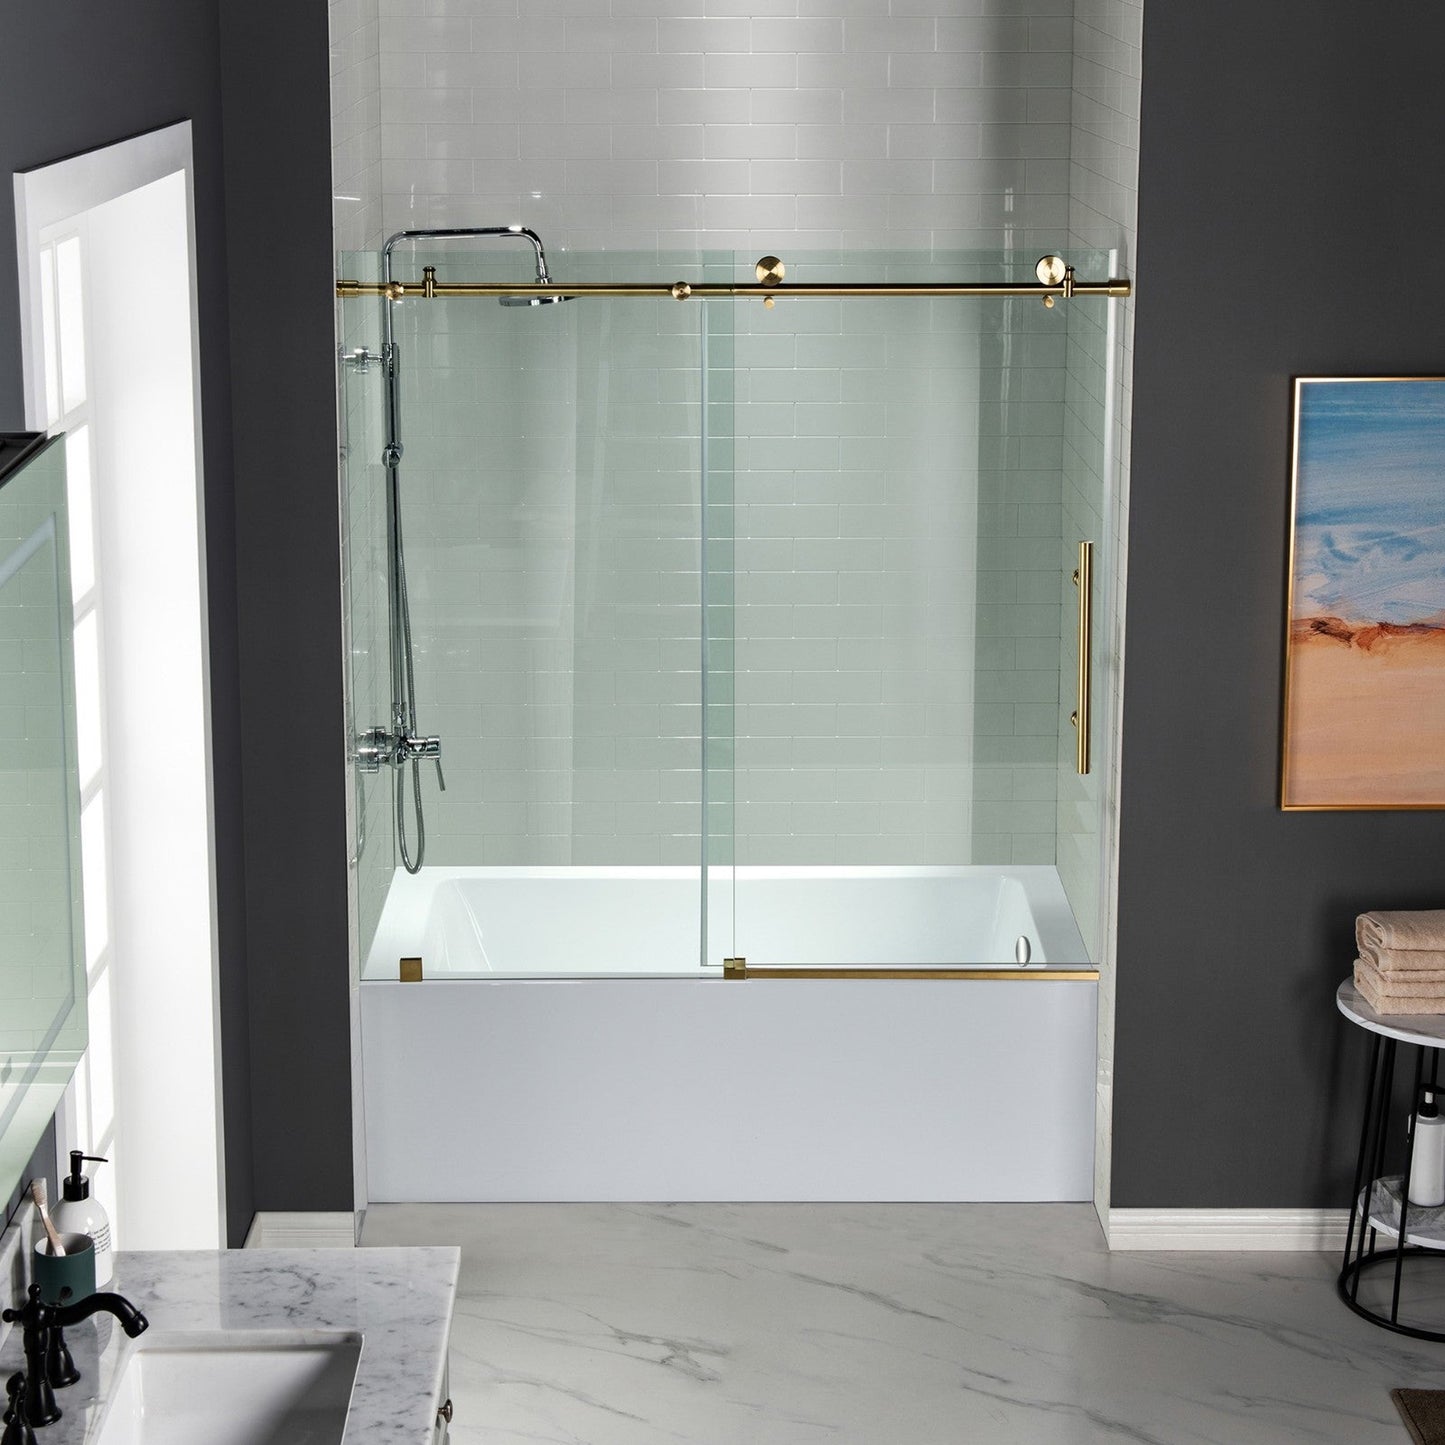 WoodBridge 60" W x 62" H Clear Tempered Glass Frameless Shower Door With Brushed Gold Hardware Finish